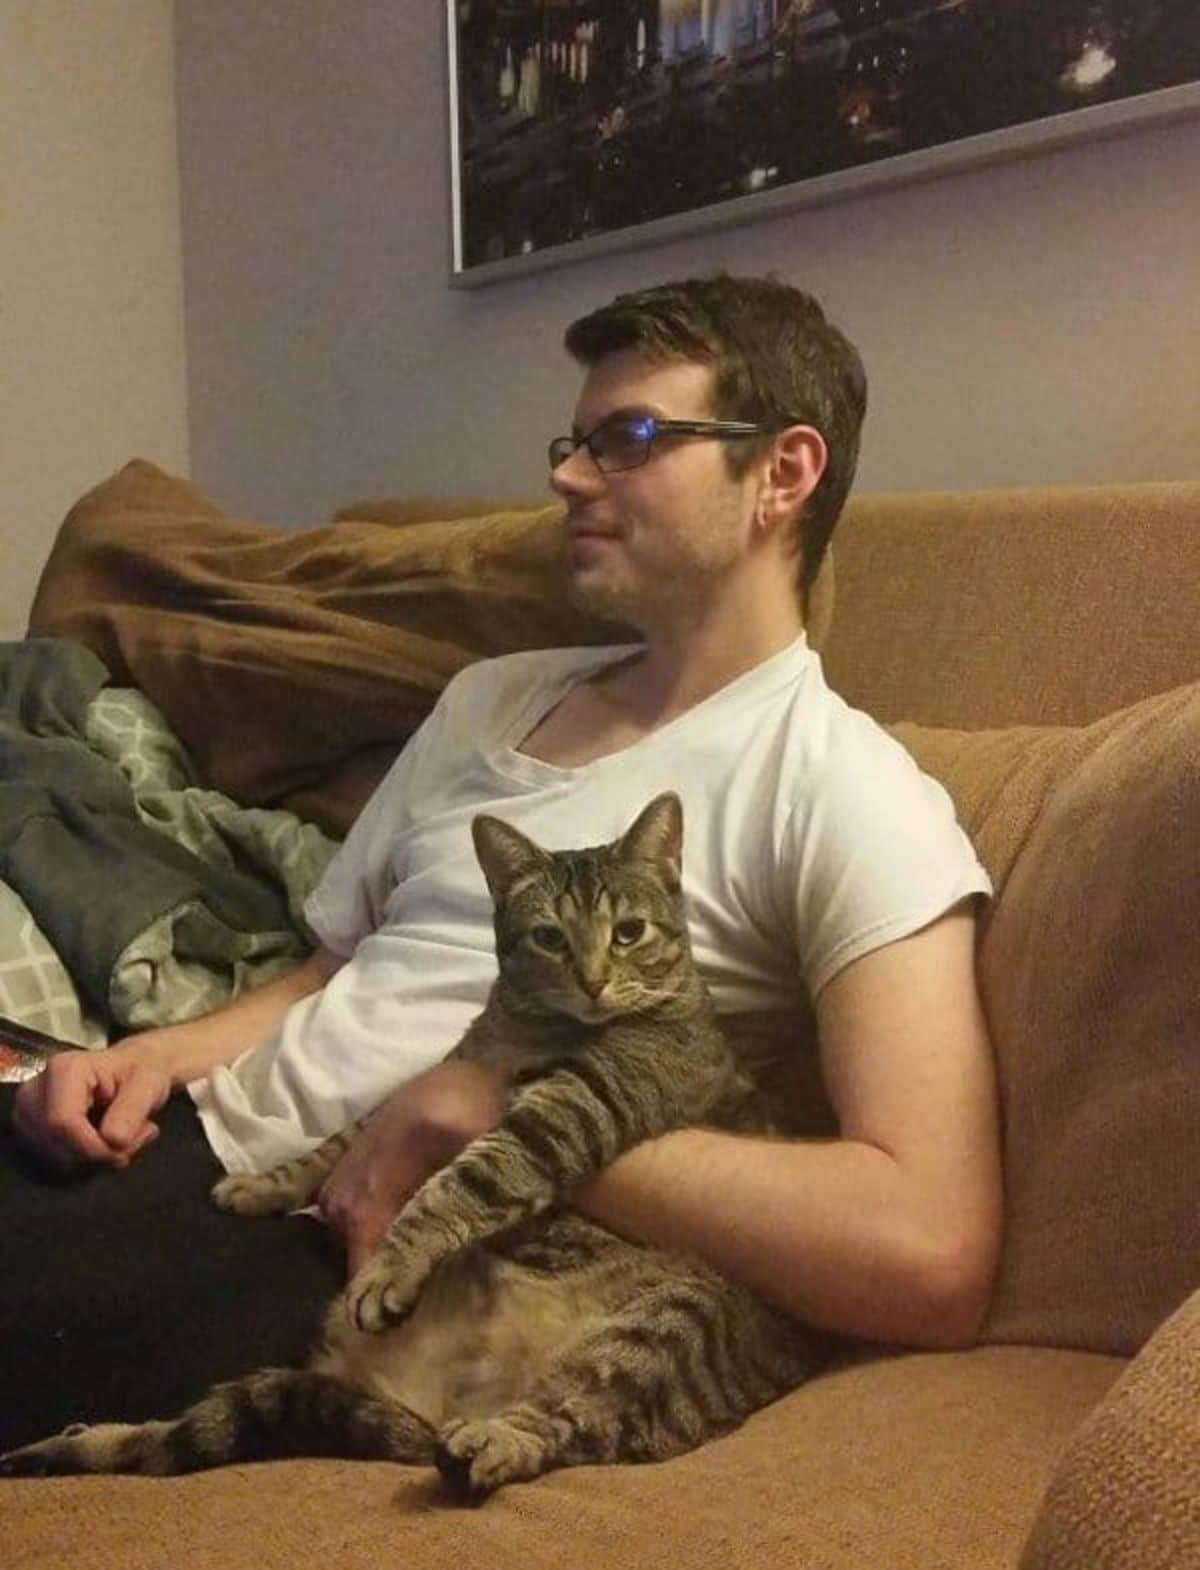 grey tabby cat sitting being held by a man on a brown sofa